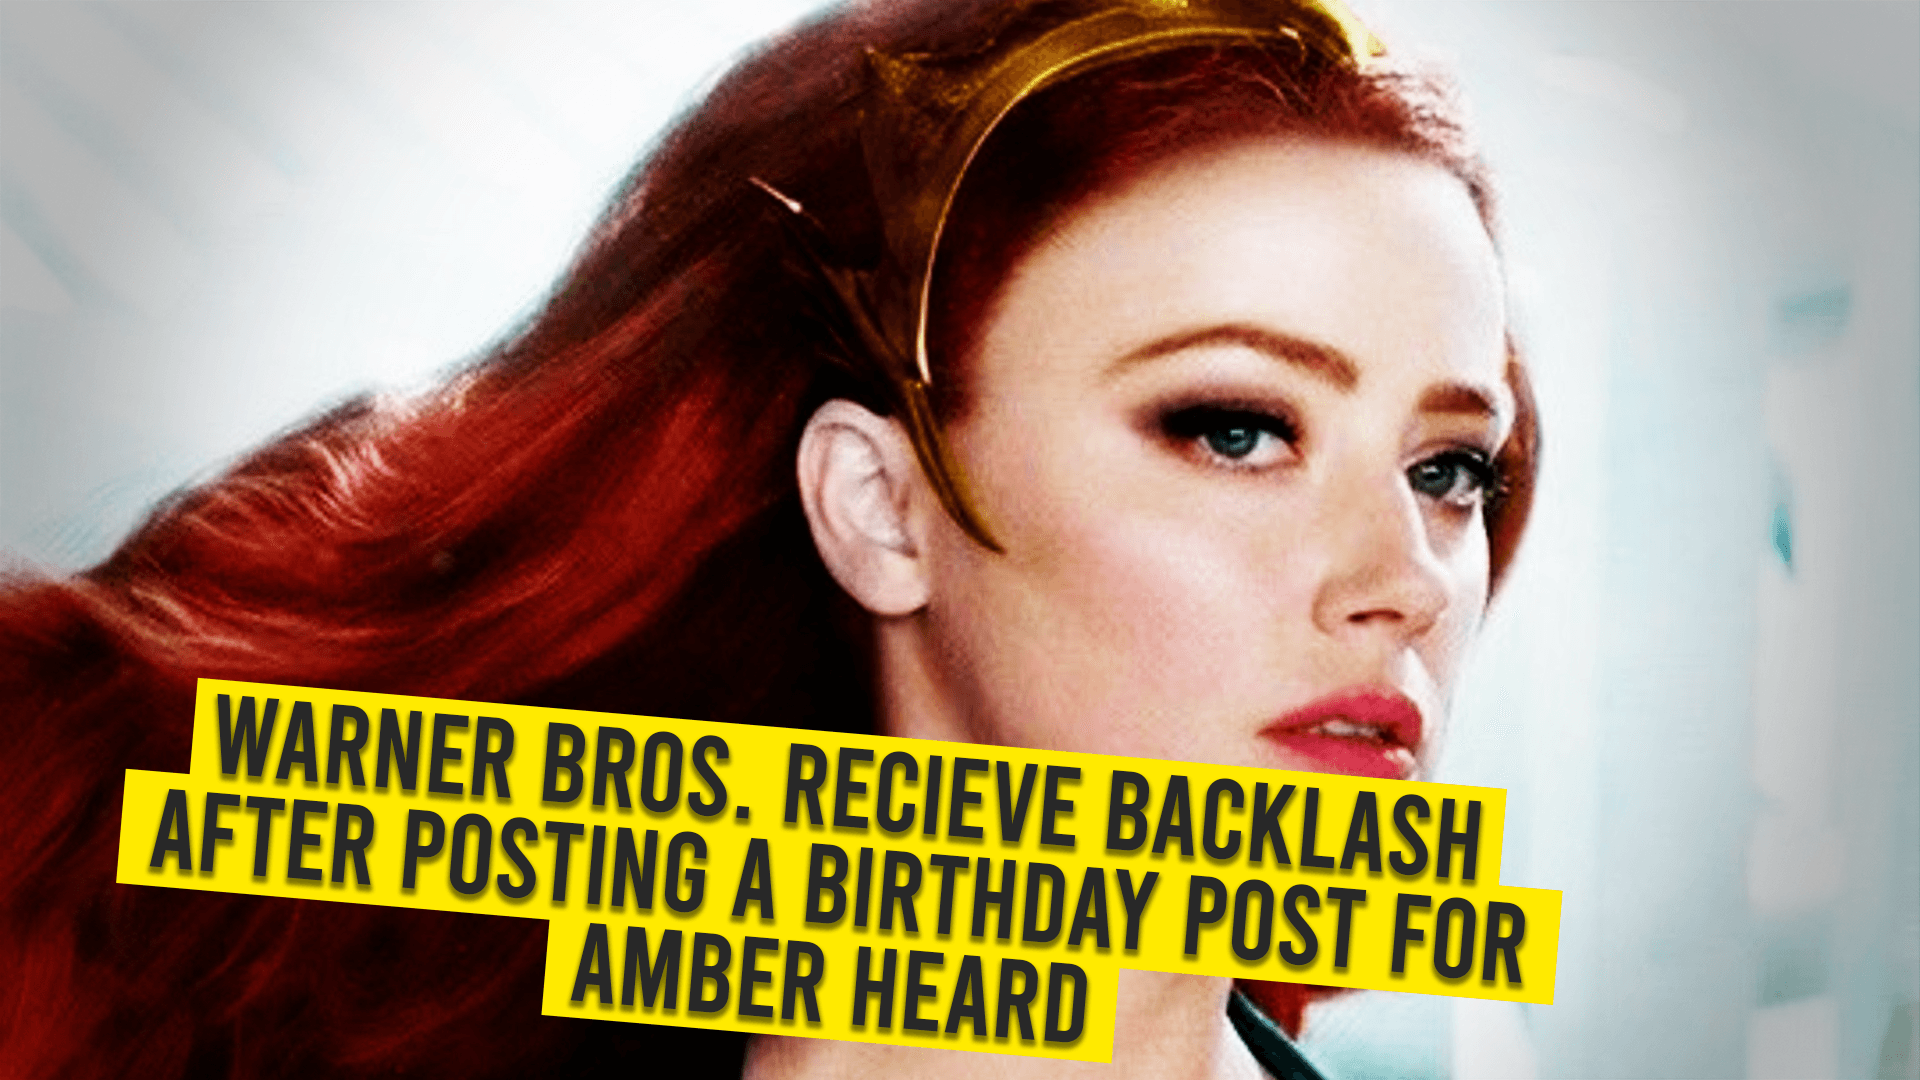 Warner Bros. Receive Backlash After Posting A Birthday Post For Amber Heard